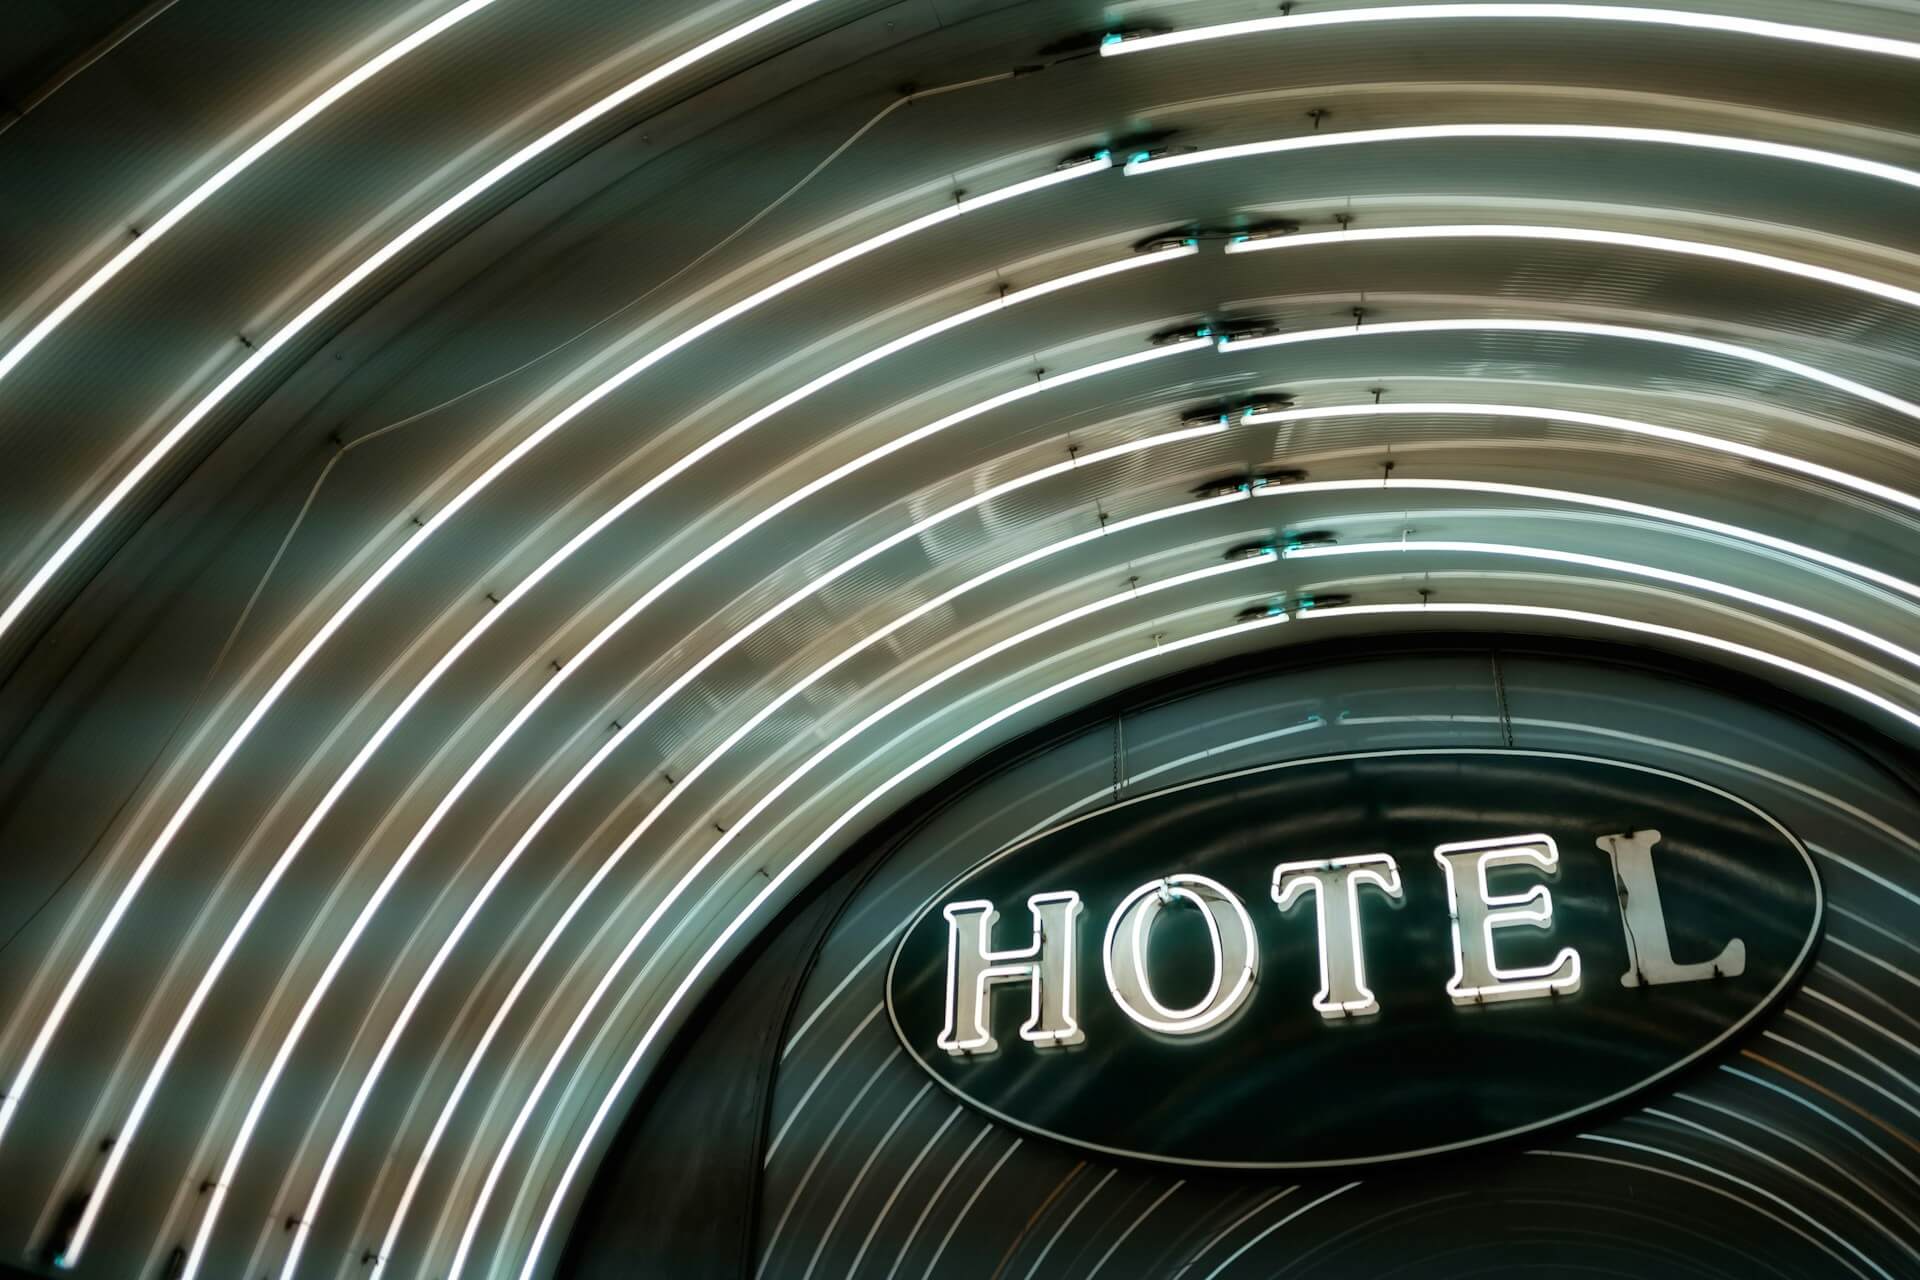 White neon sign that reads "HOTEL," with concentric white neon rings